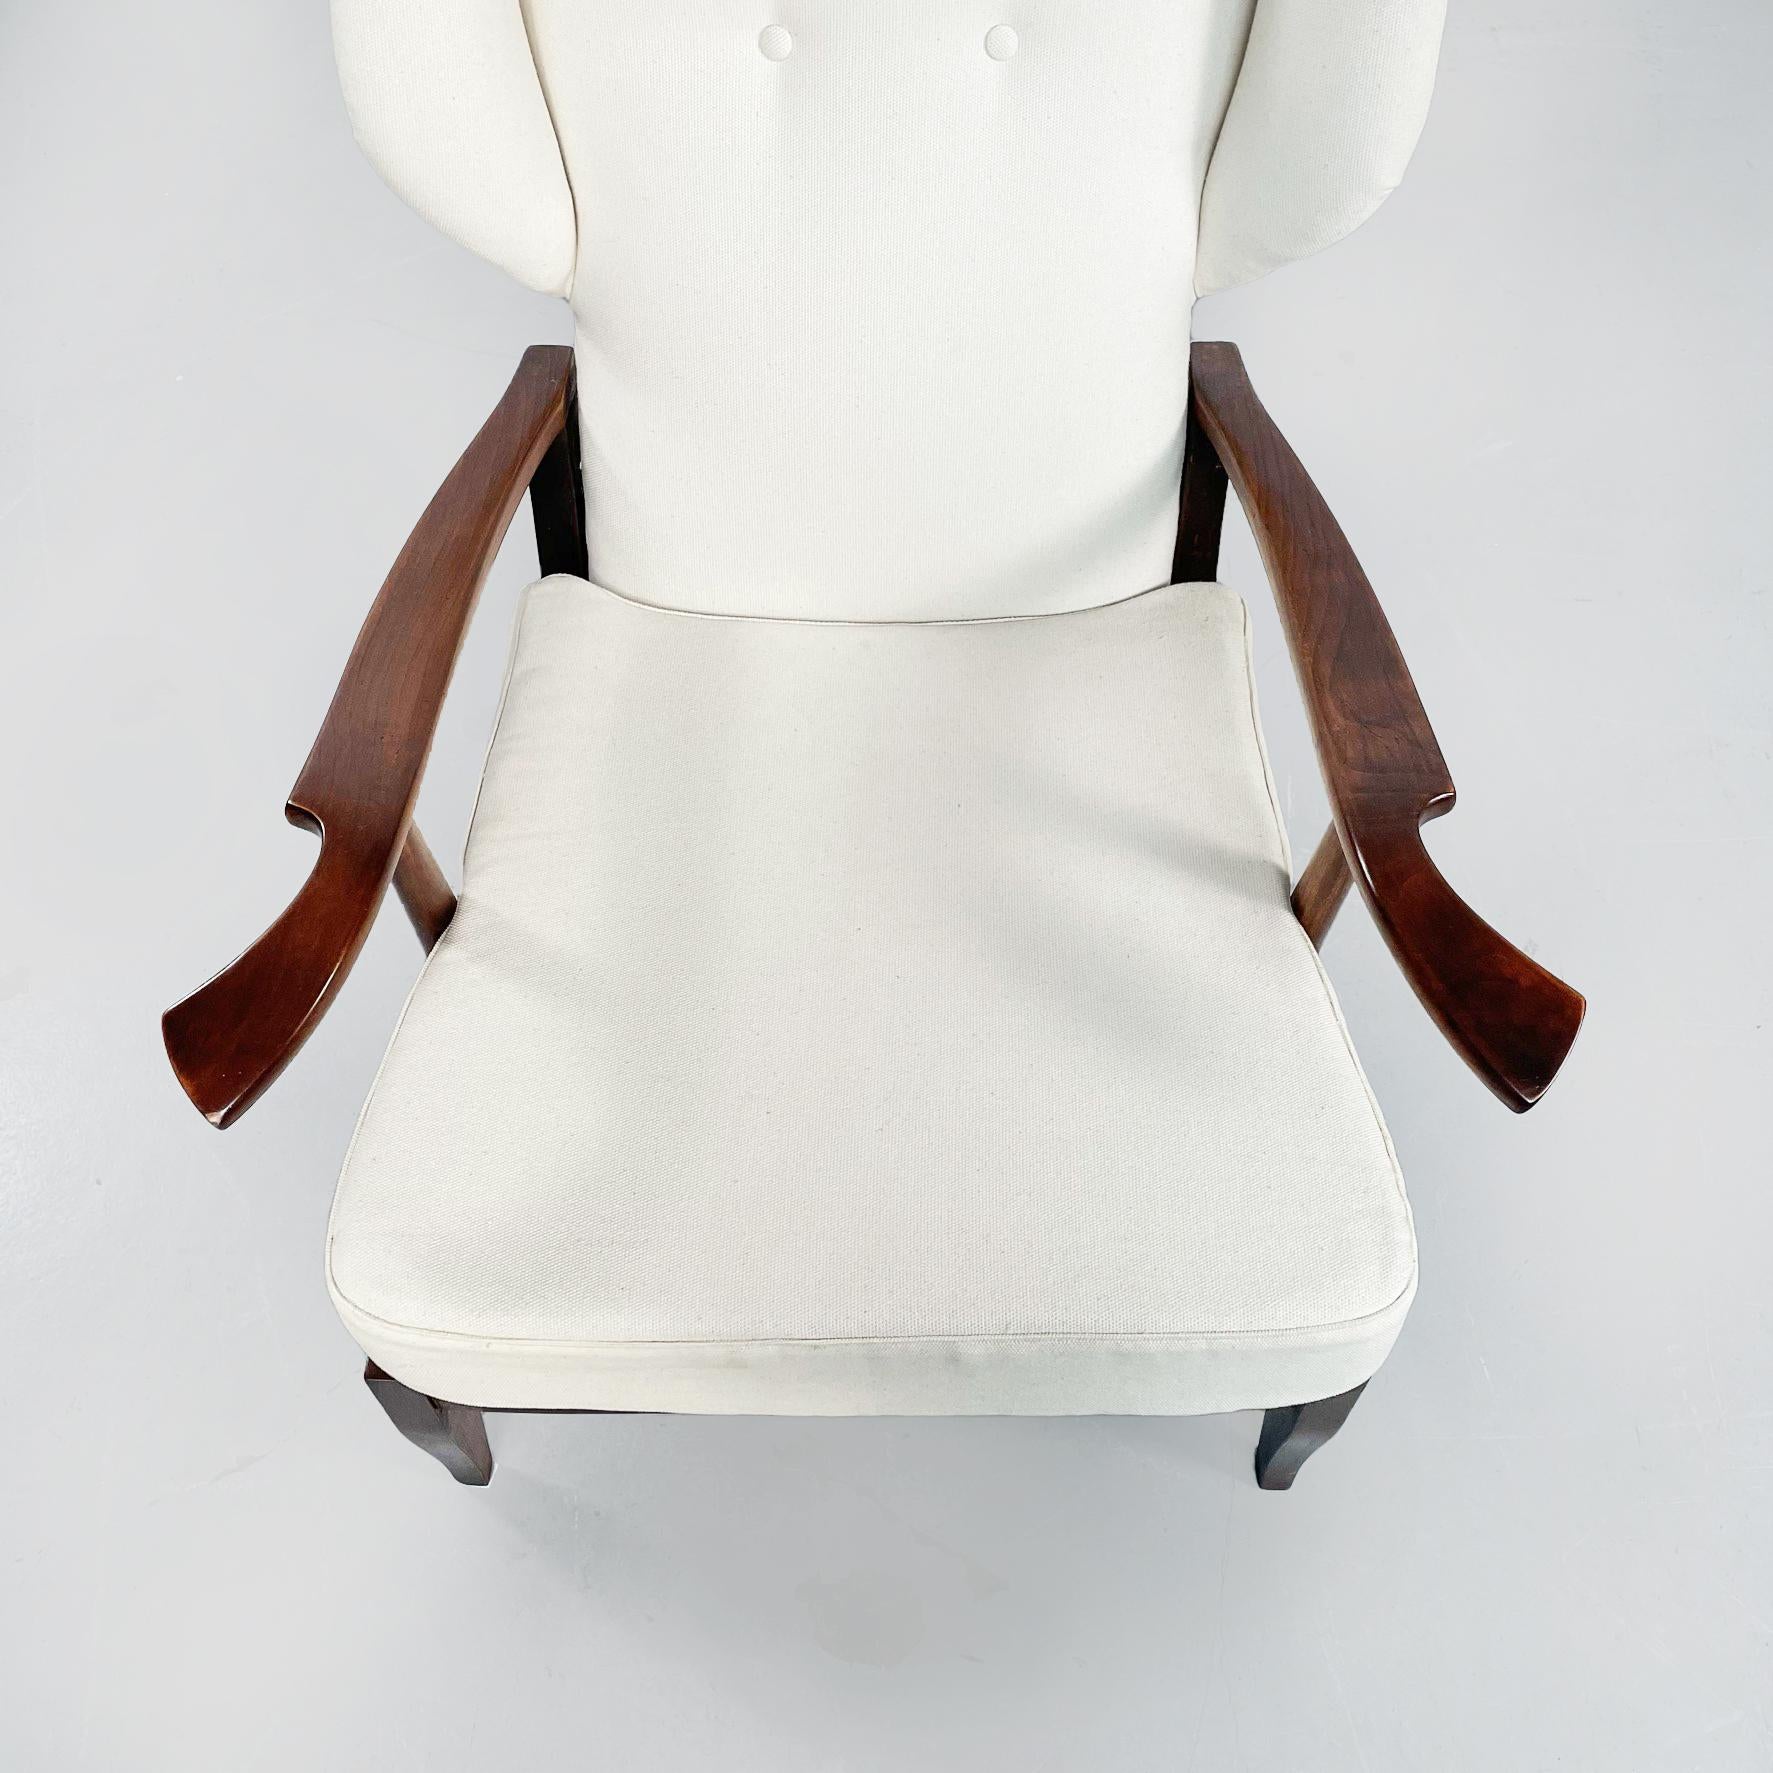 Italian Mid-Century White Fabric and Wooden Armchair by Paolo Buffa, 1950s For Sale 2